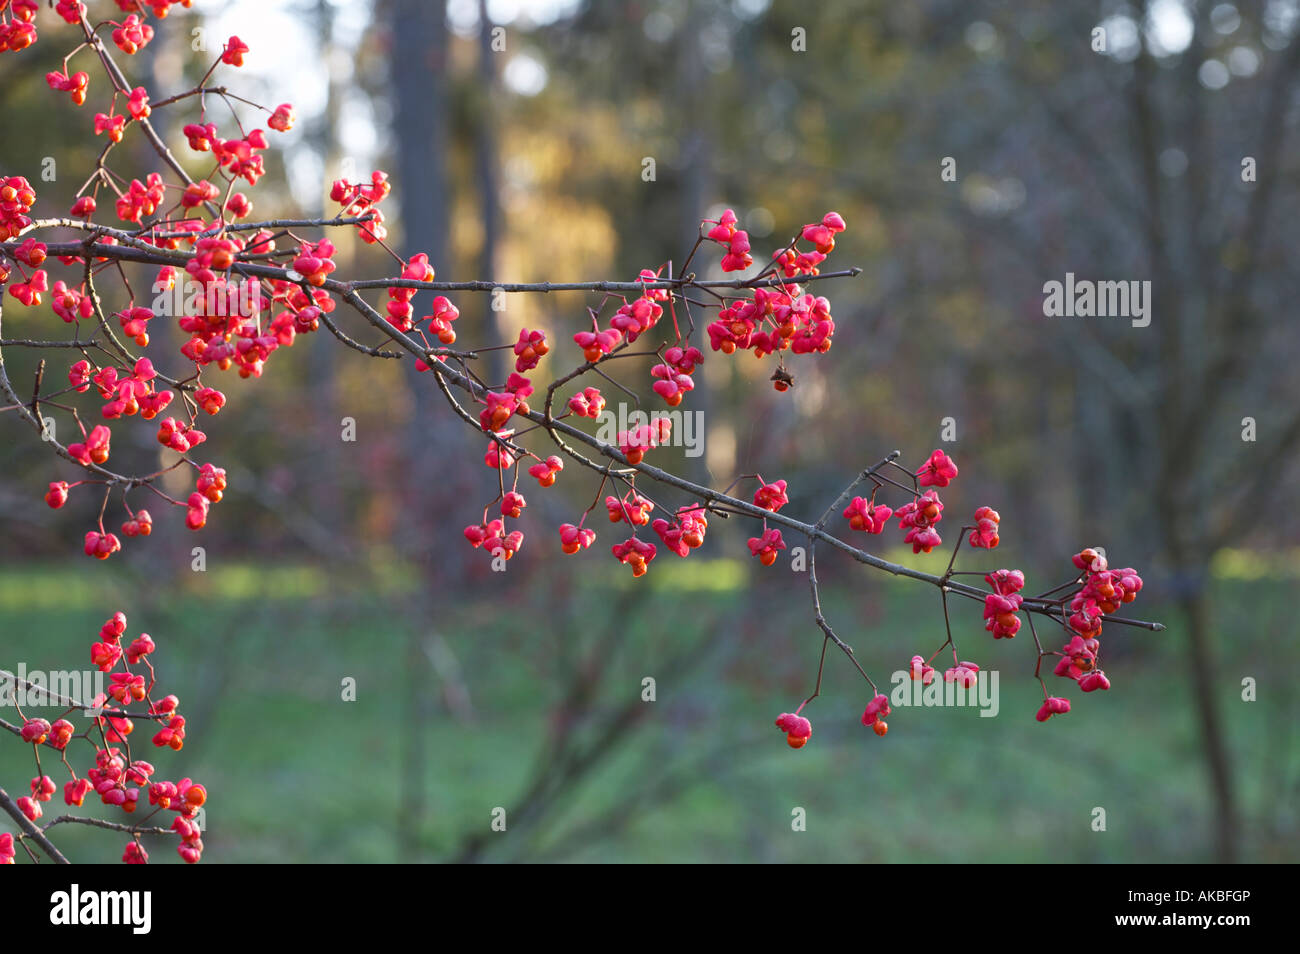 Chinese spindle tree Stock Photo